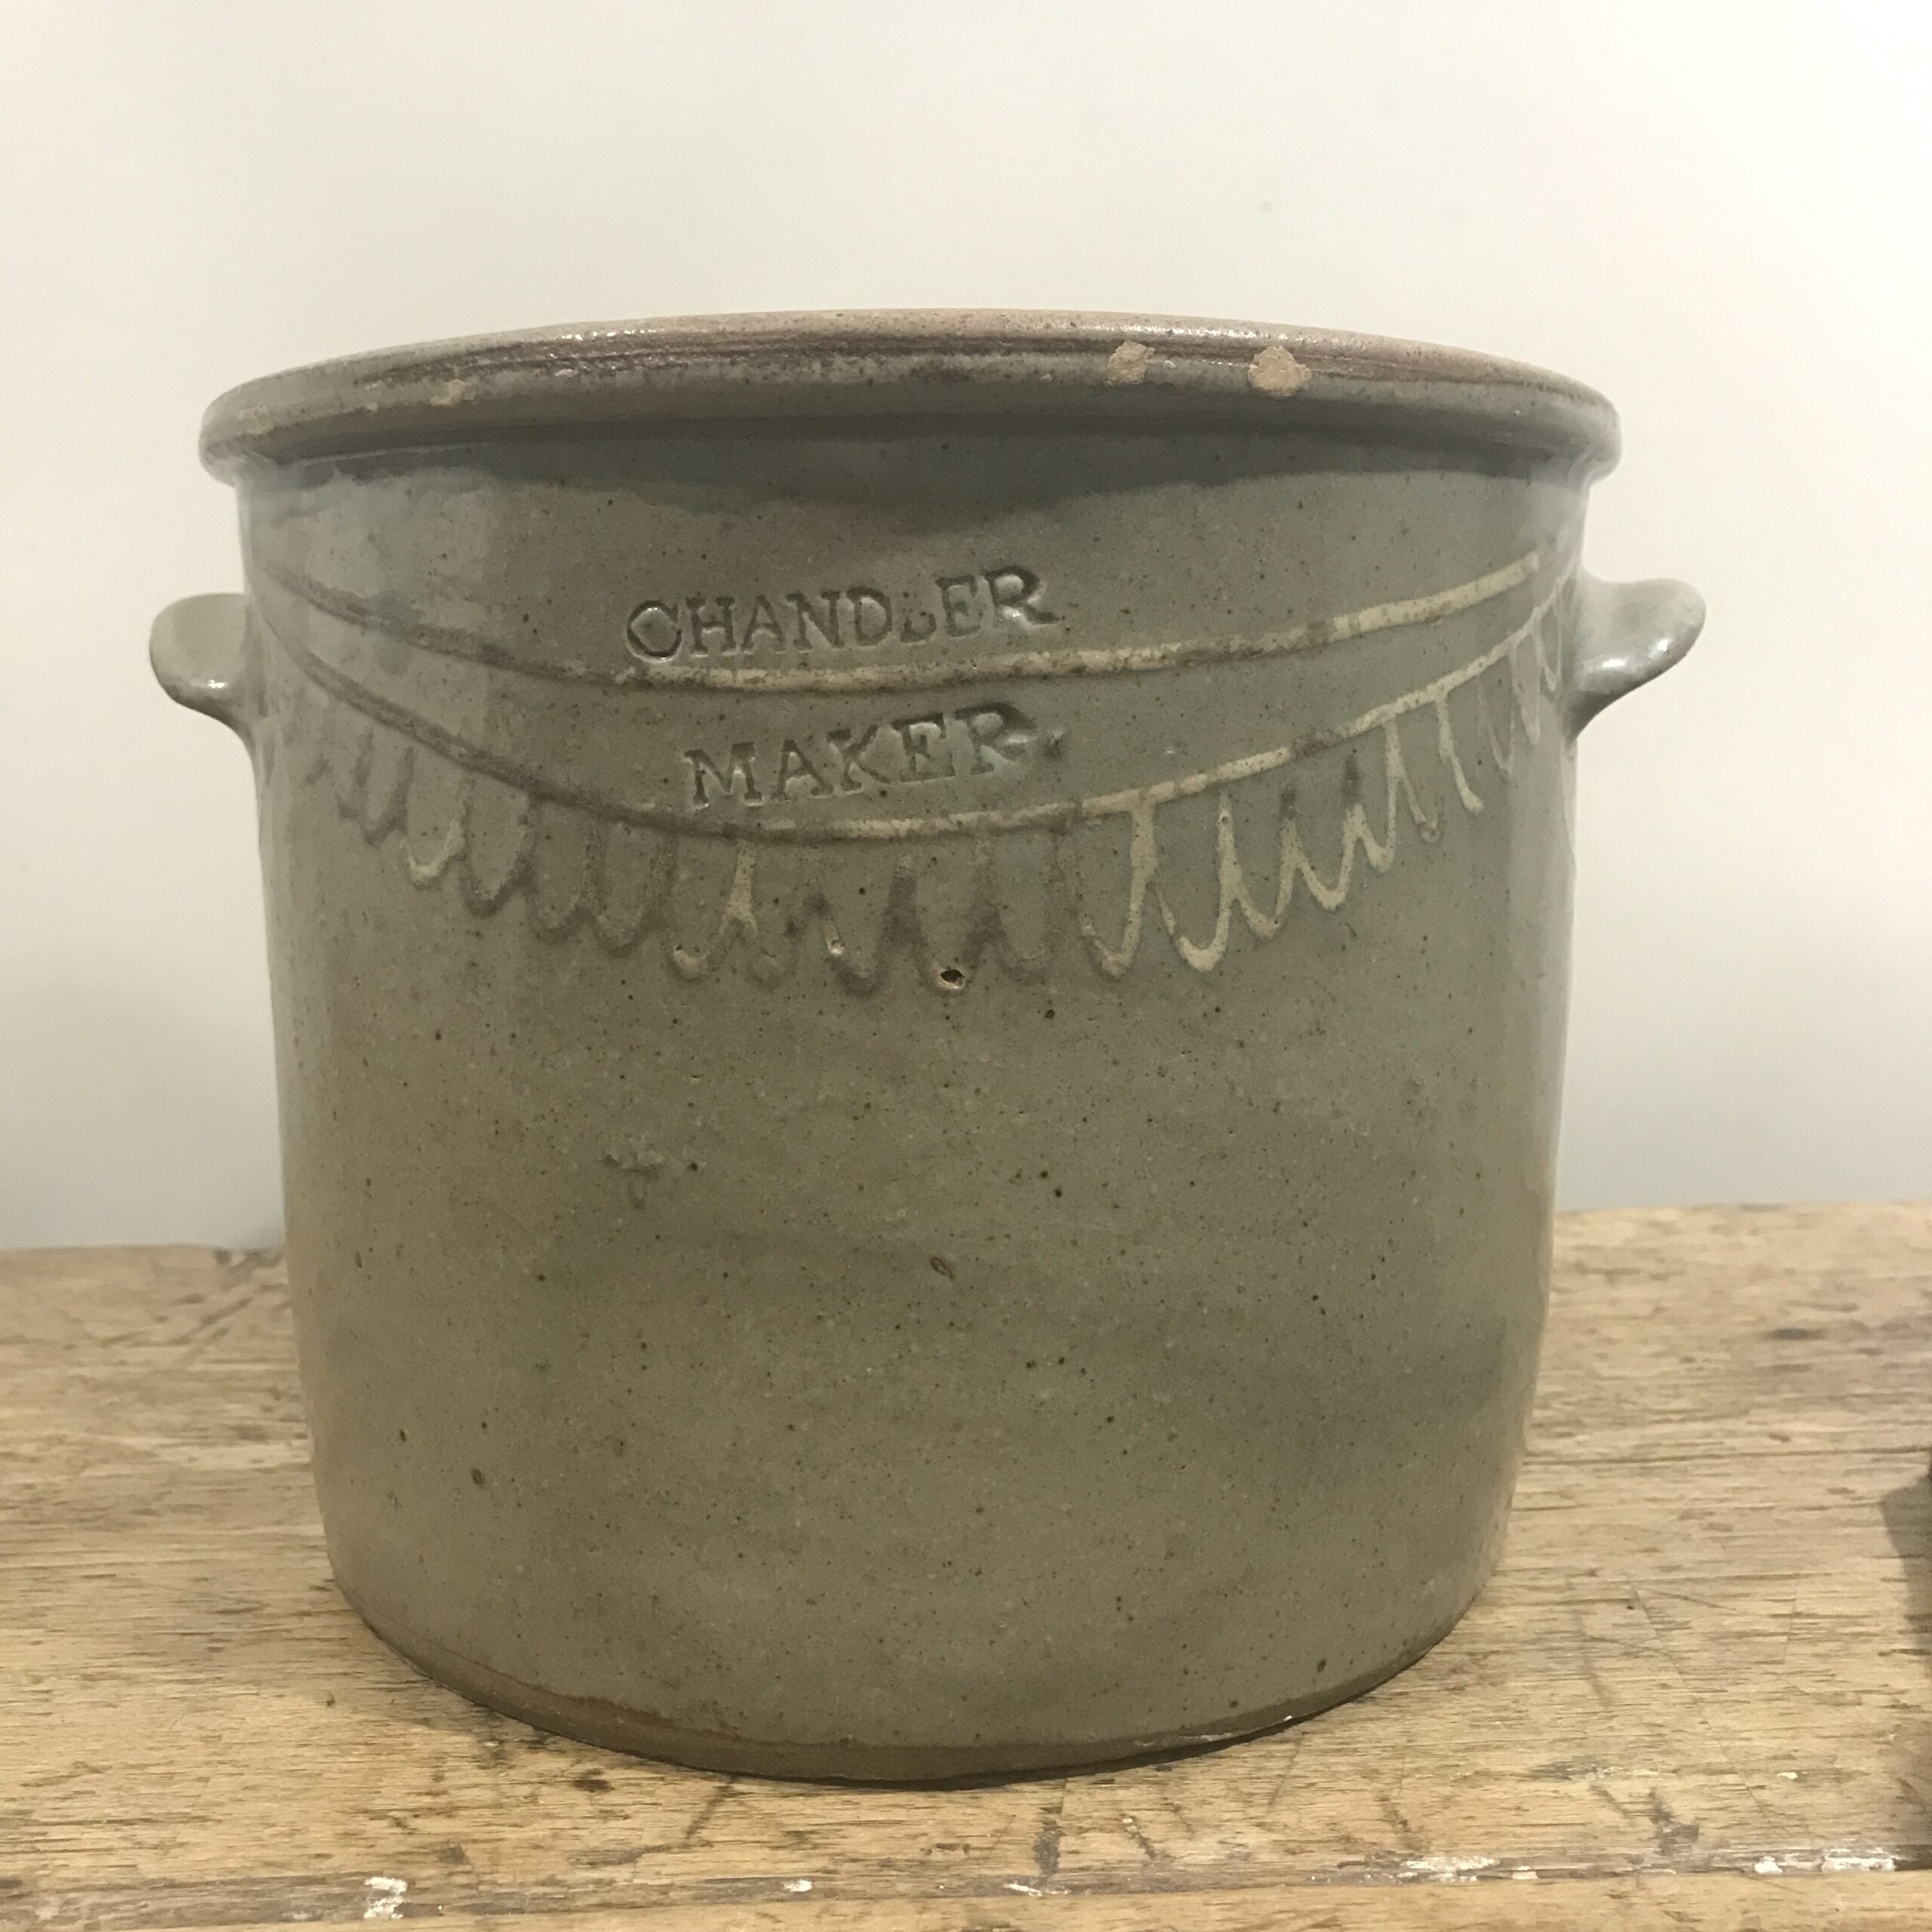 Valuable Chandler Maker Pottery from Edgefield, Found in Toolshed